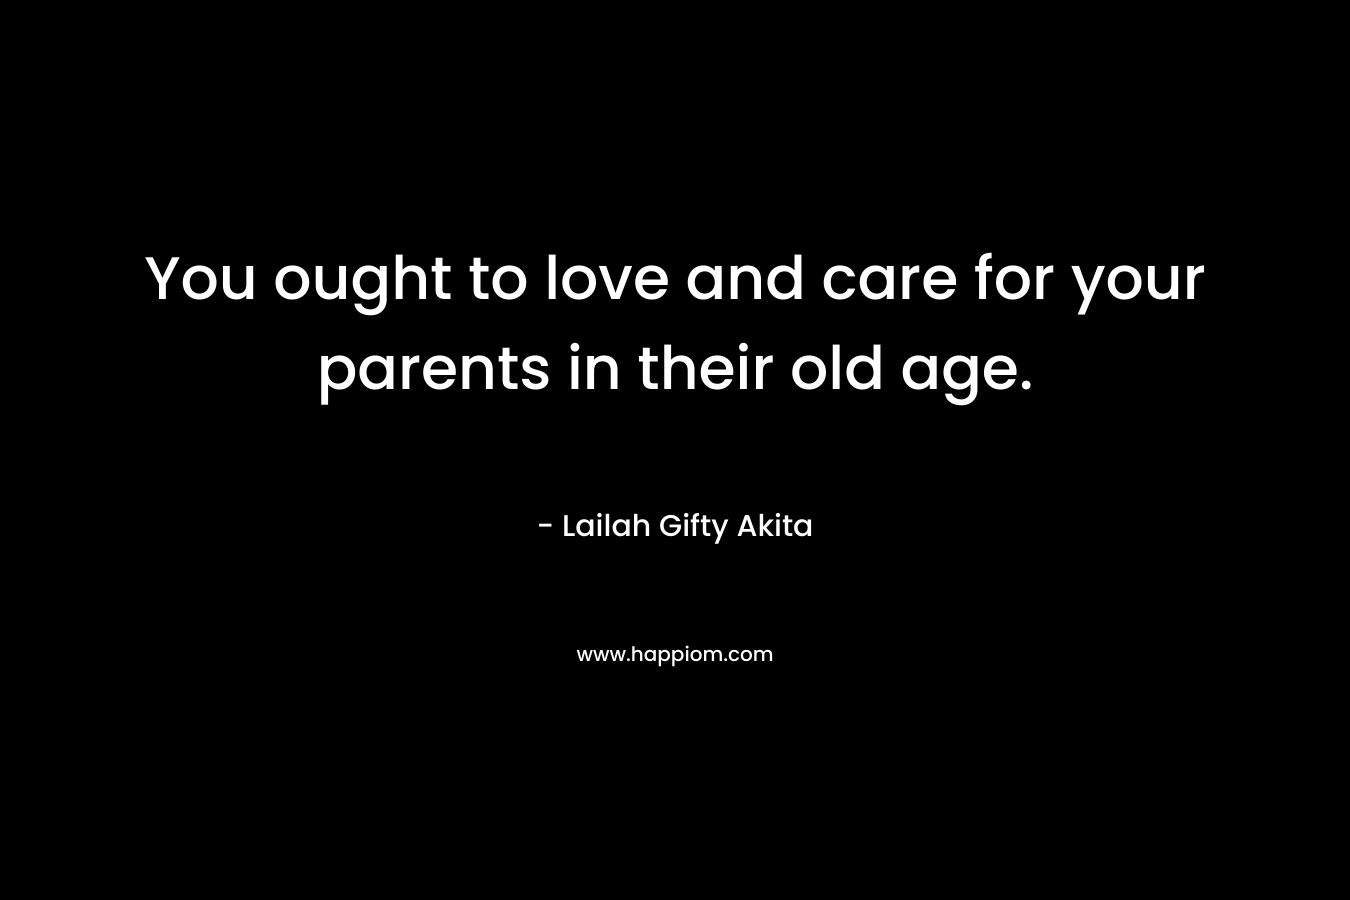 You ought to love and care for your parents in their old age.